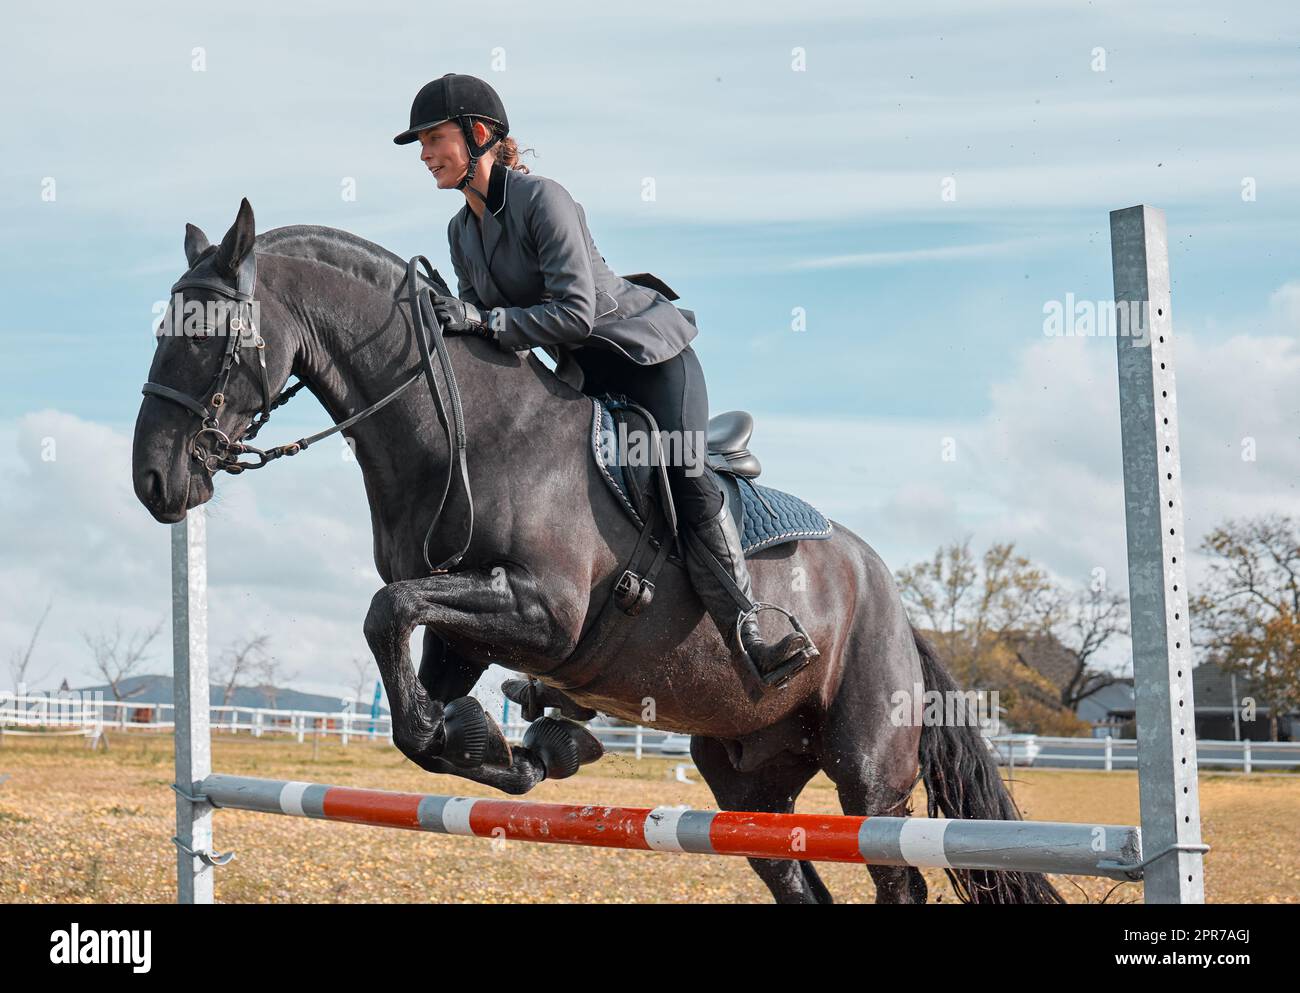 Galloping away on a new adventure. a young rider jumping over a hurdle on her horse. Stock Photo